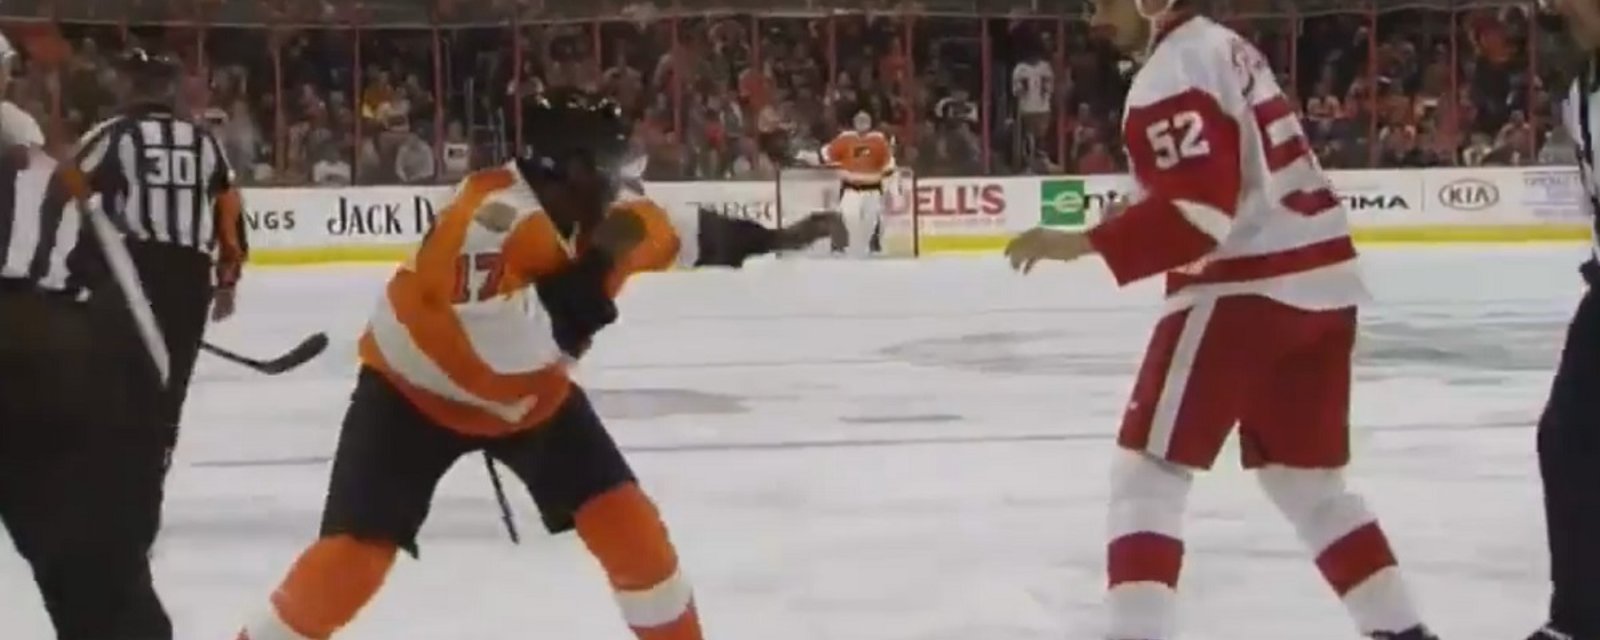 Simmonds vs Ericsson ends in a one punch KO.